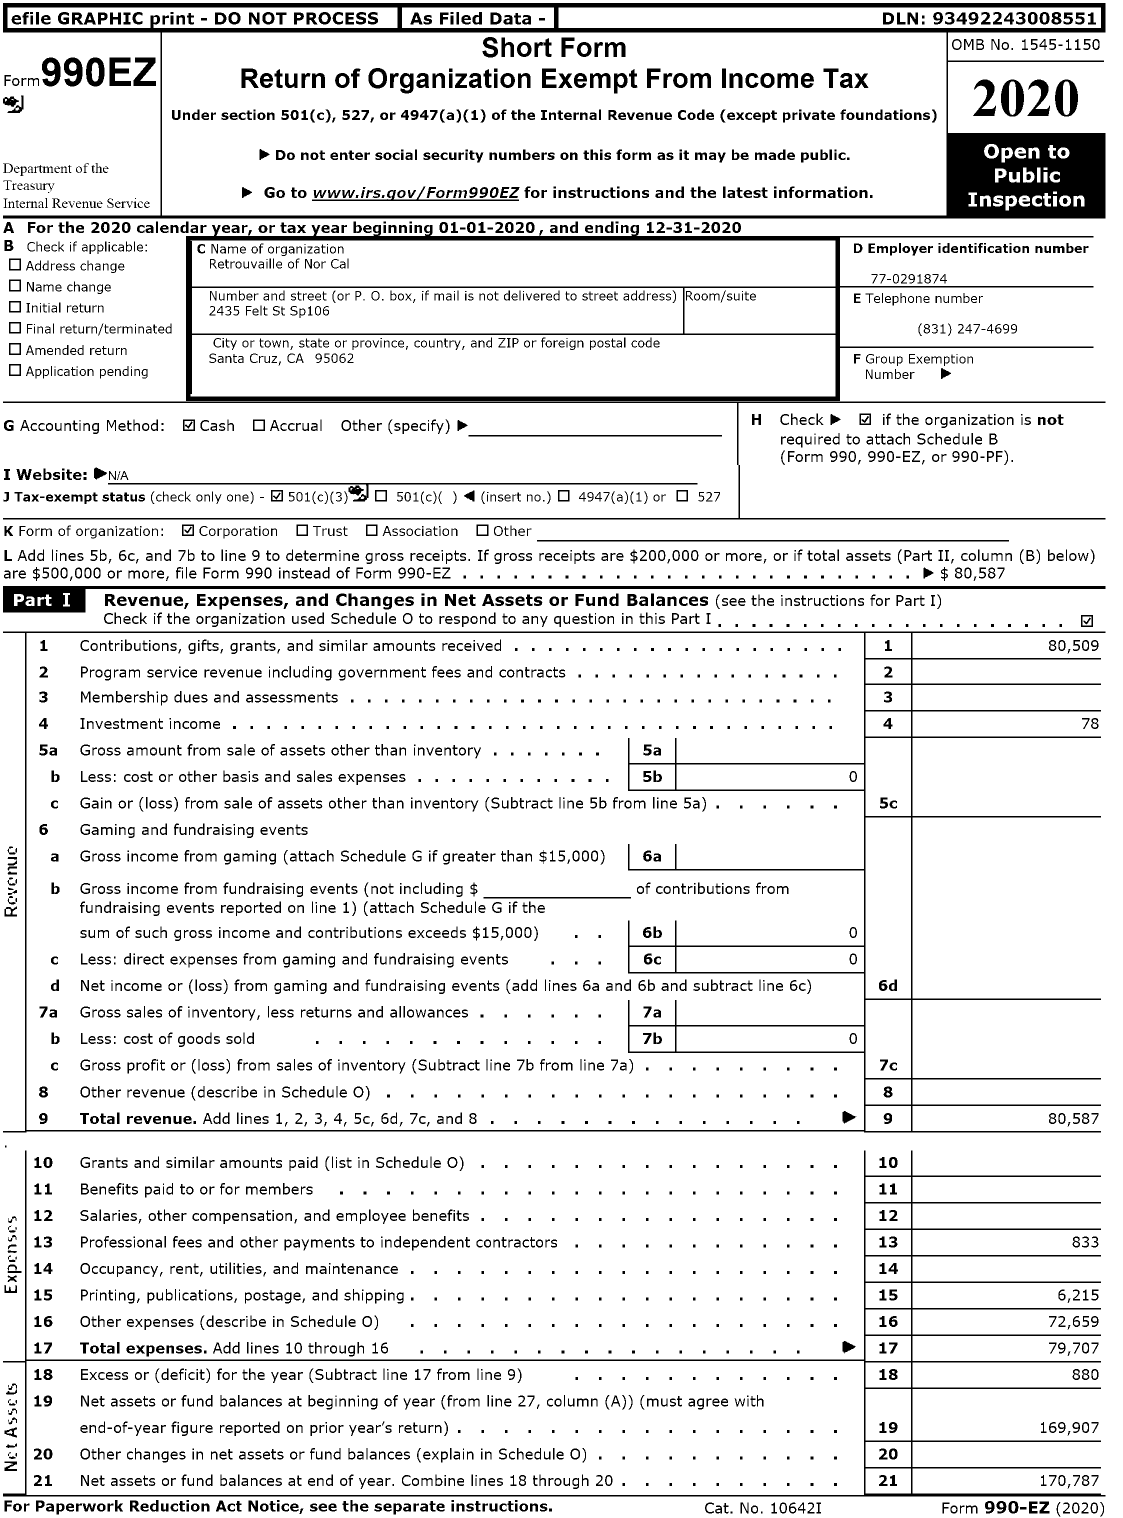 Image of first page of 2020 Form 990EZ for Retrouvaille of Norcal Cal